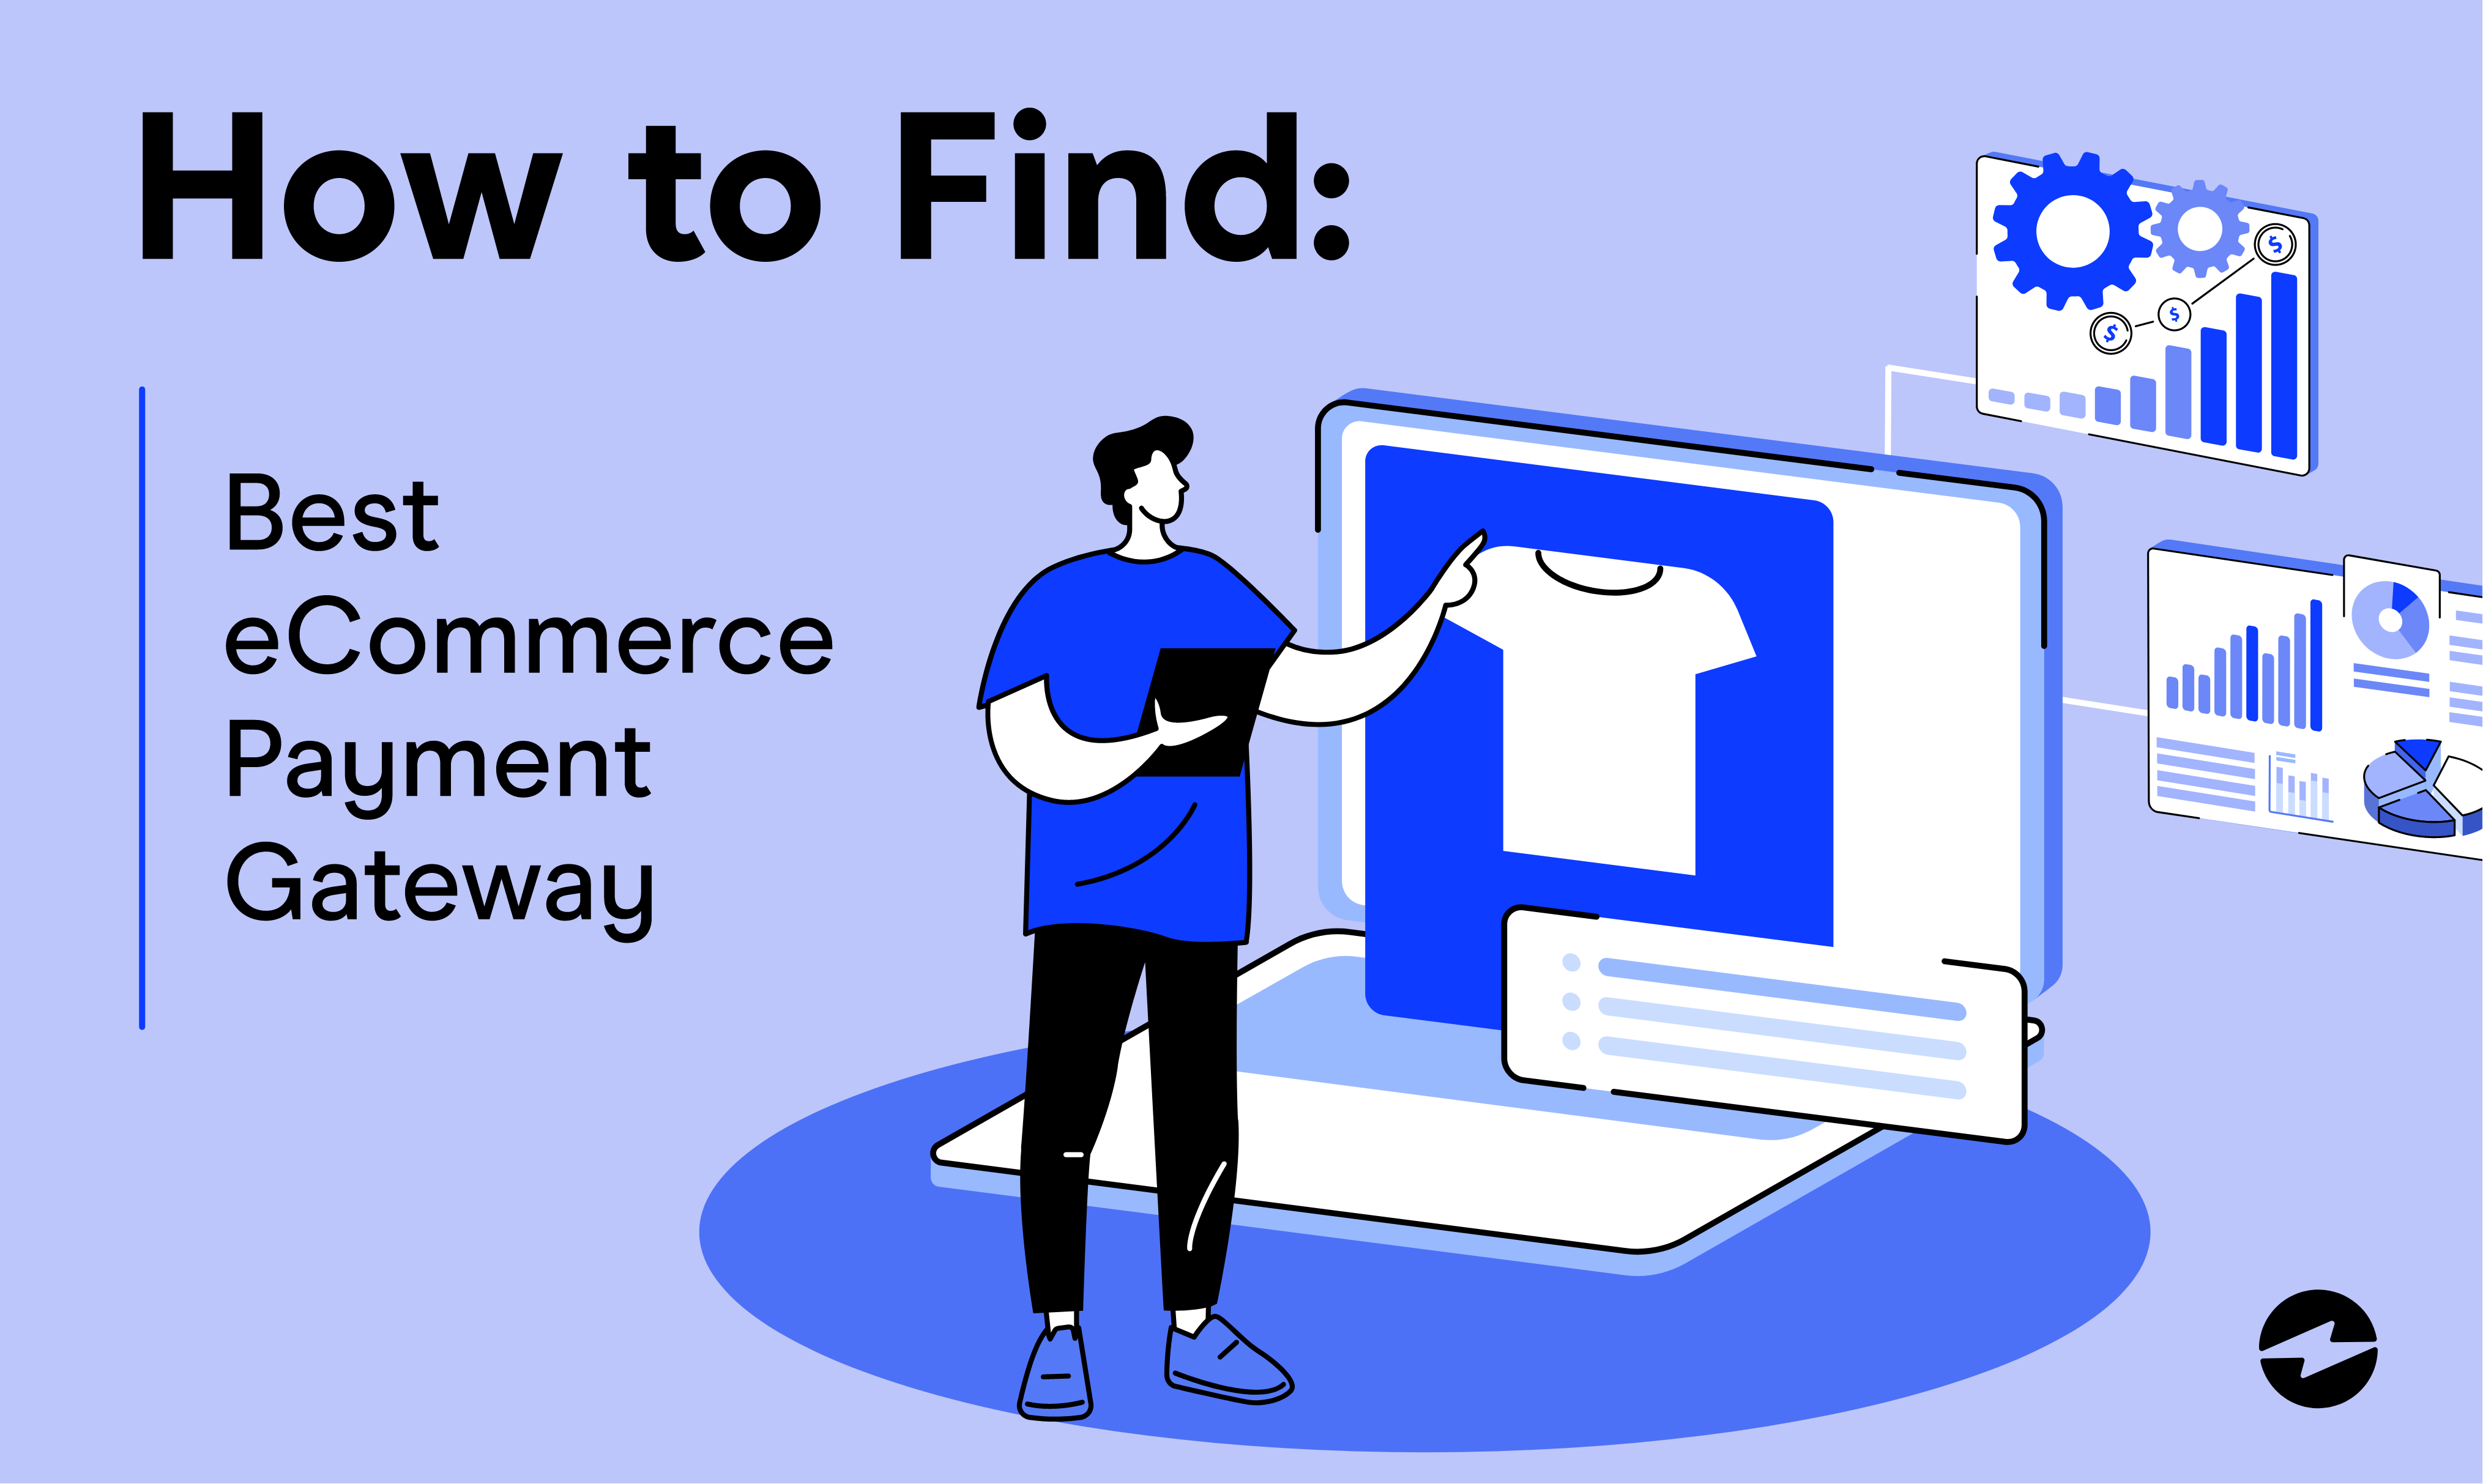 How to Find Best eCommerce Payment Gateway